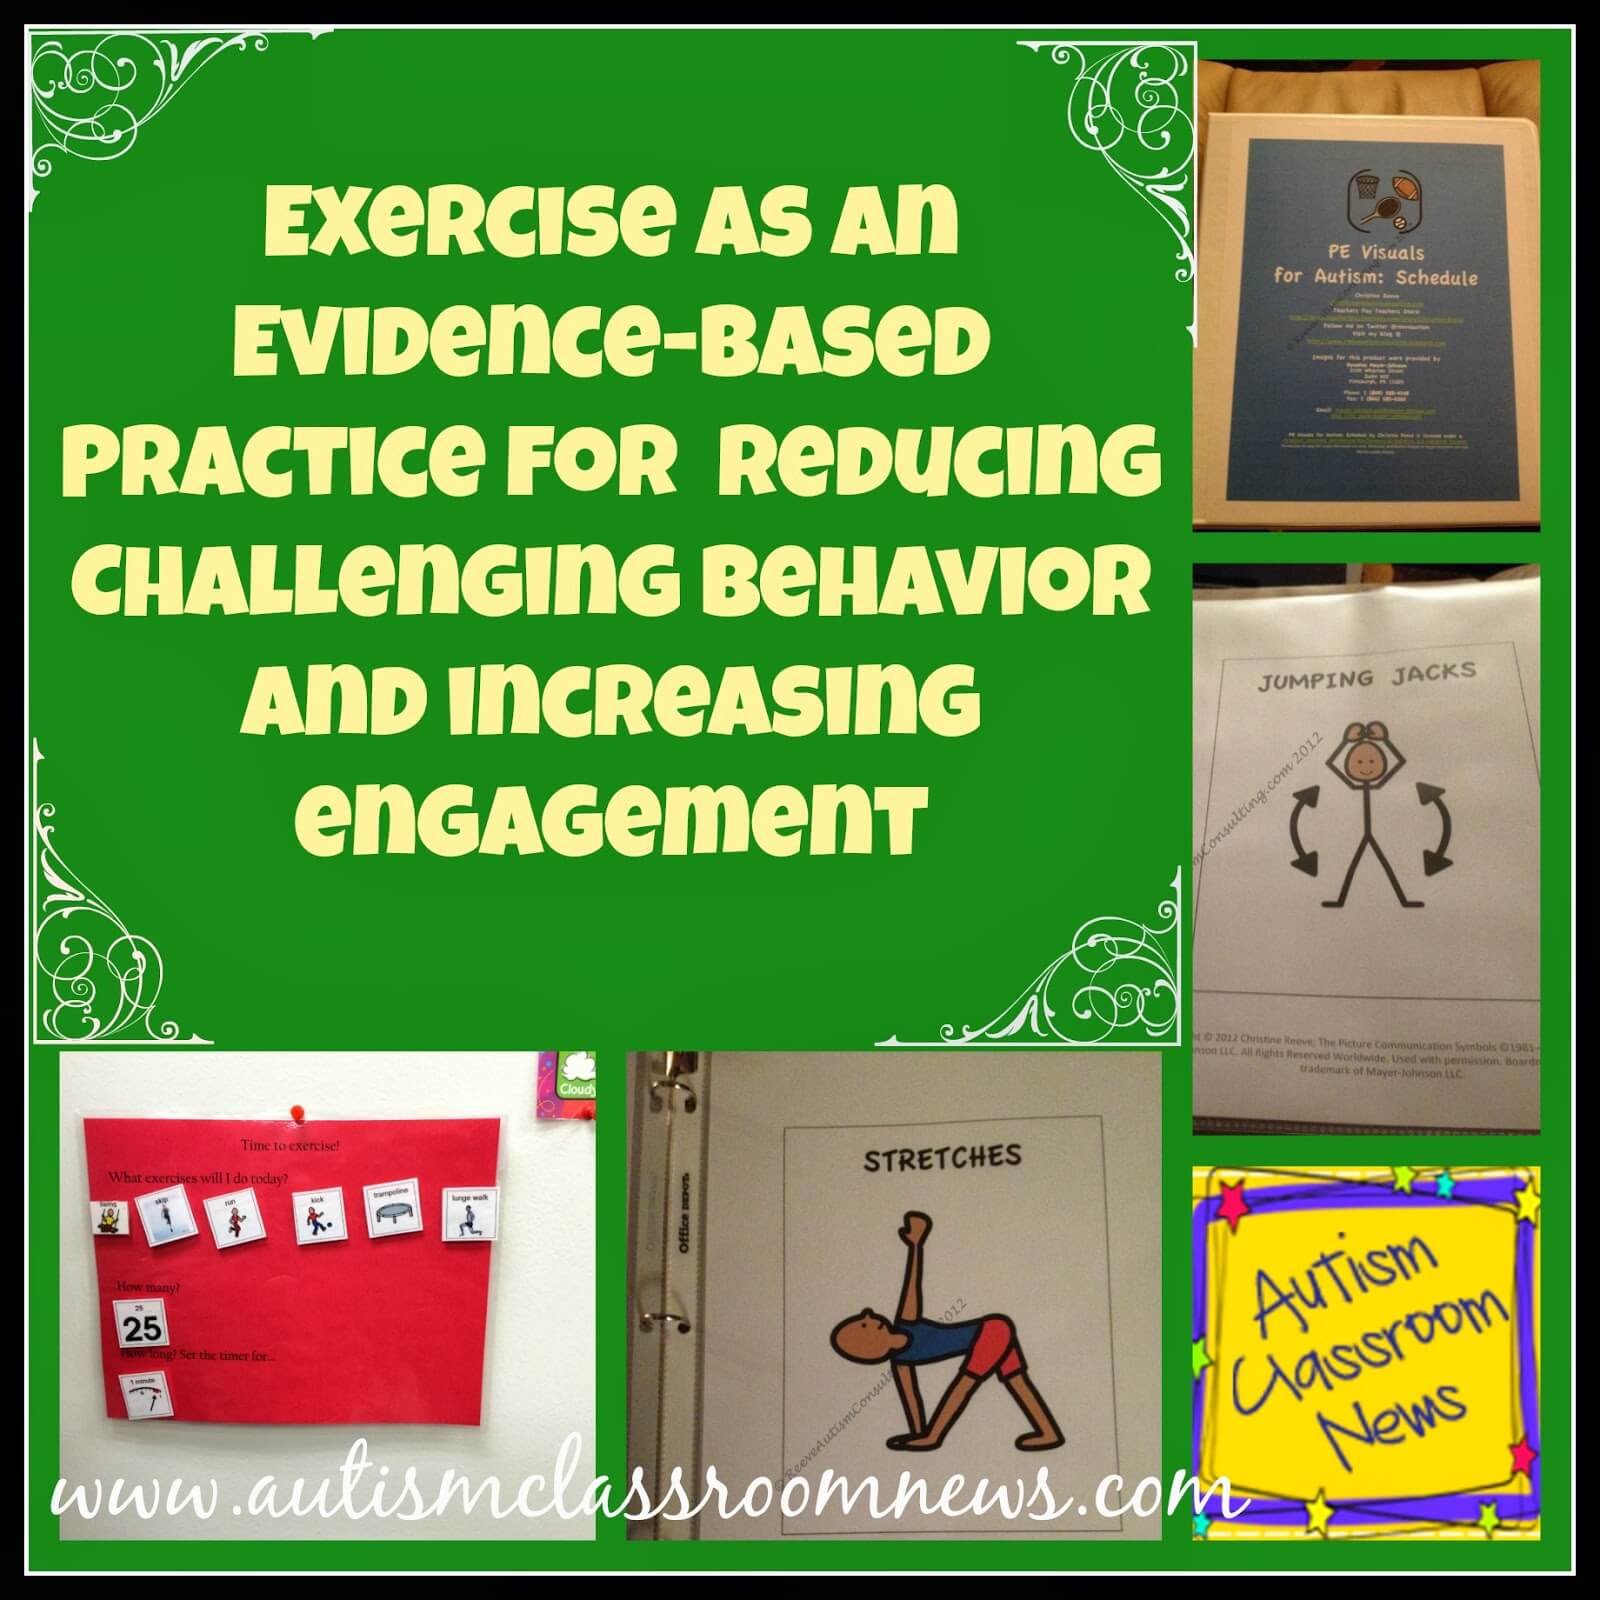 Applying the Research: Exercise as an Evidence